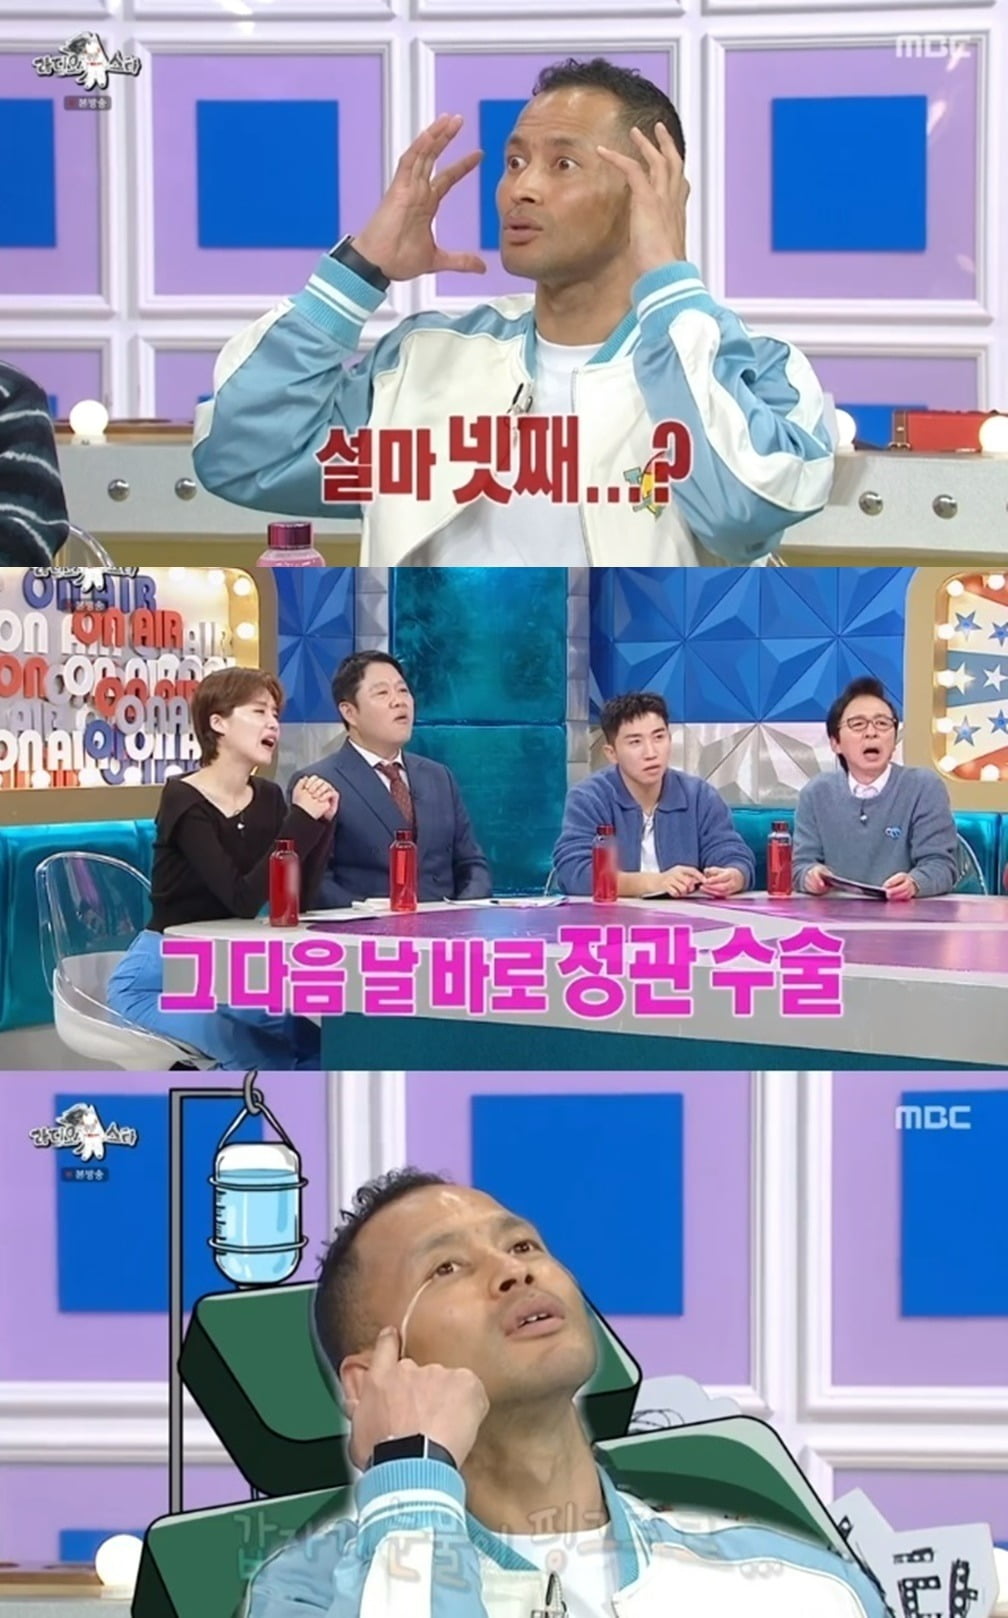 Jeon Tae-poong "I was fined 15 million won while playing basketball and almost got killed by Ha Seung-jin."